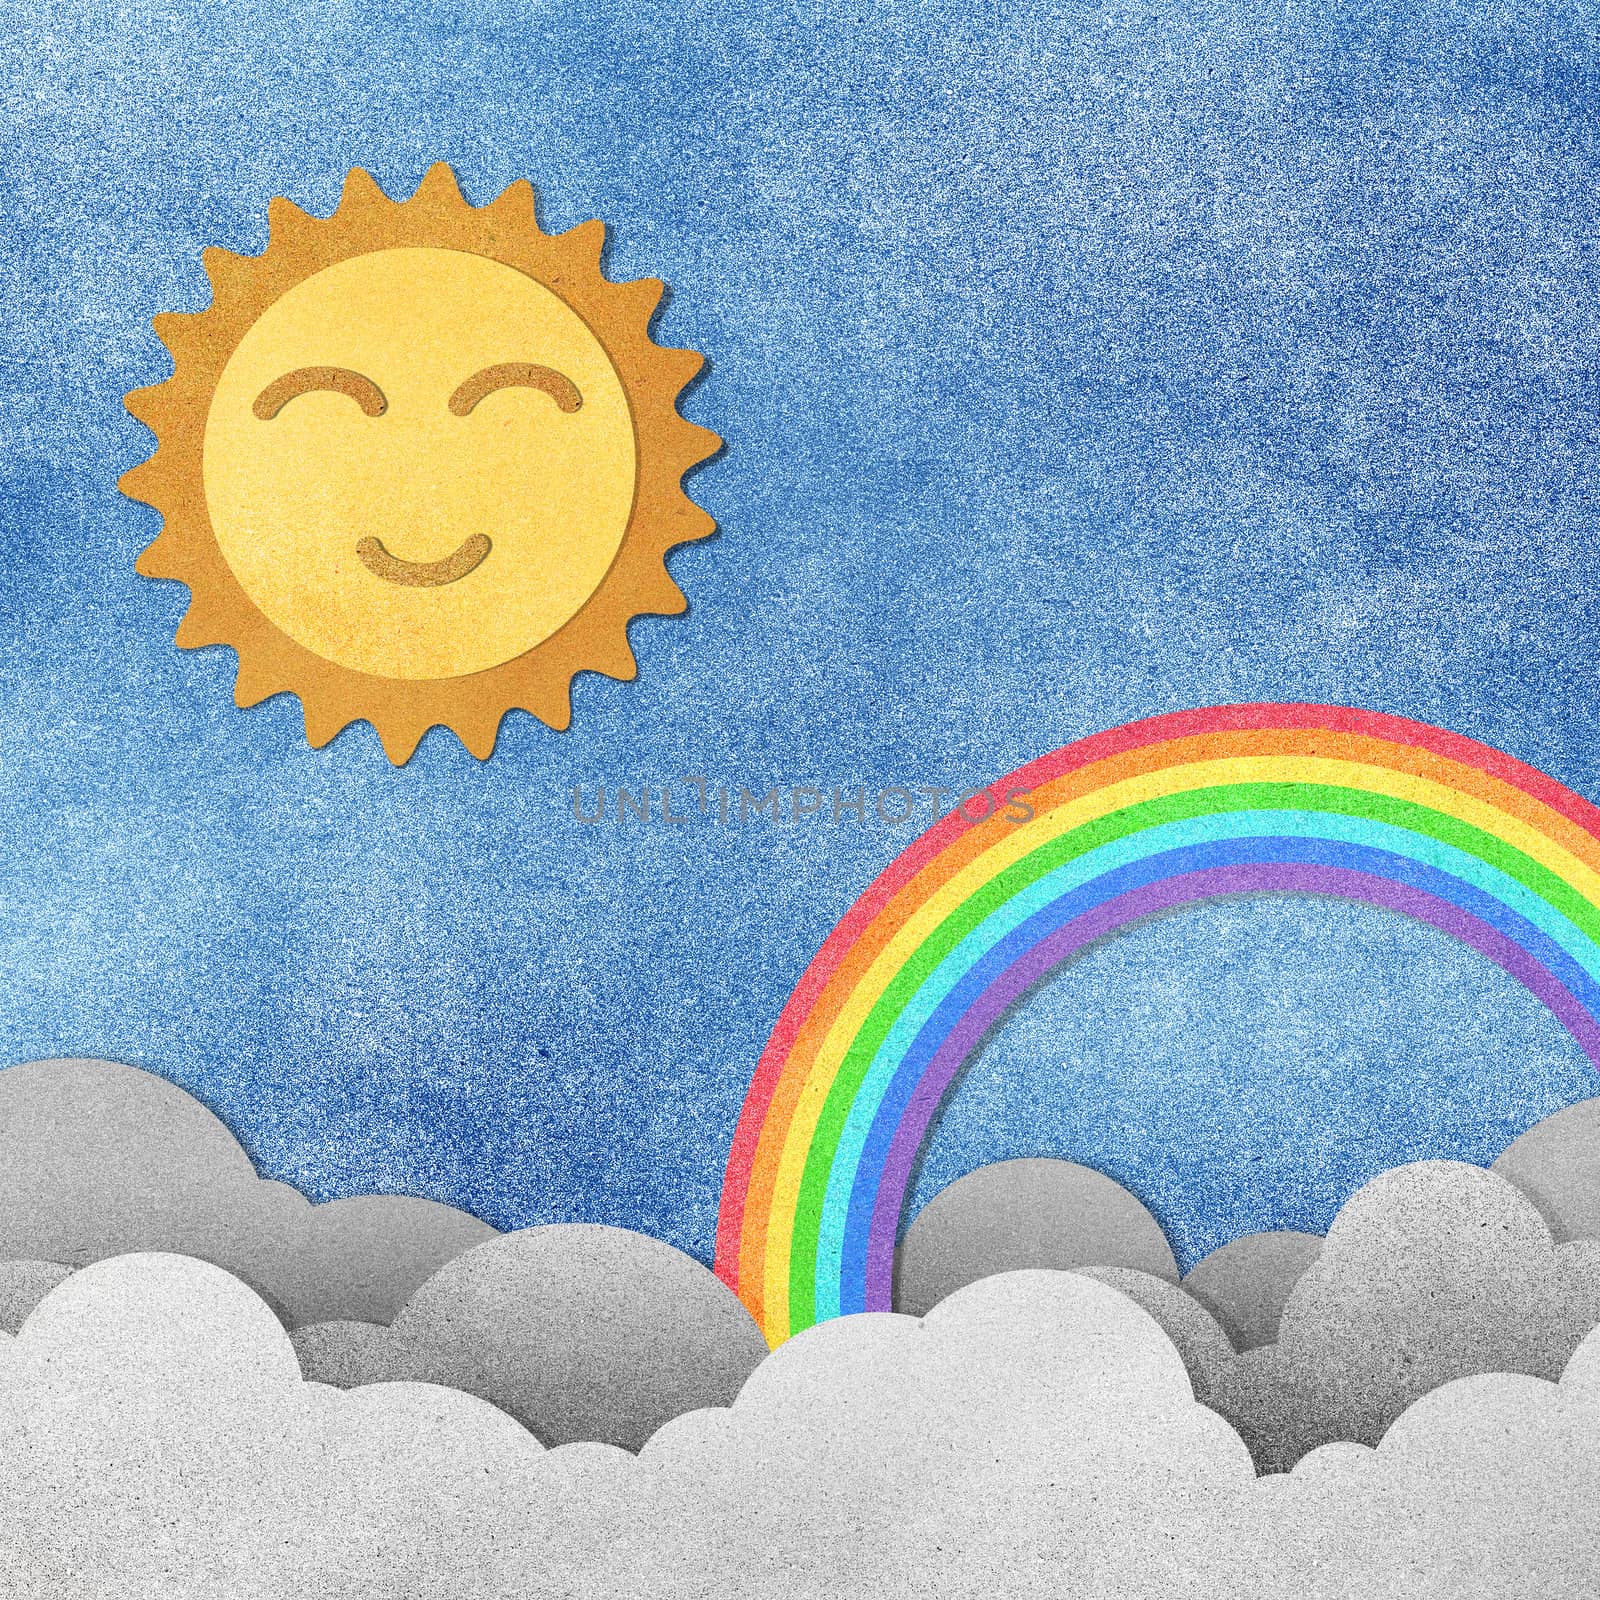 Grunge paper texture cute sun and rainbow  by jakgree